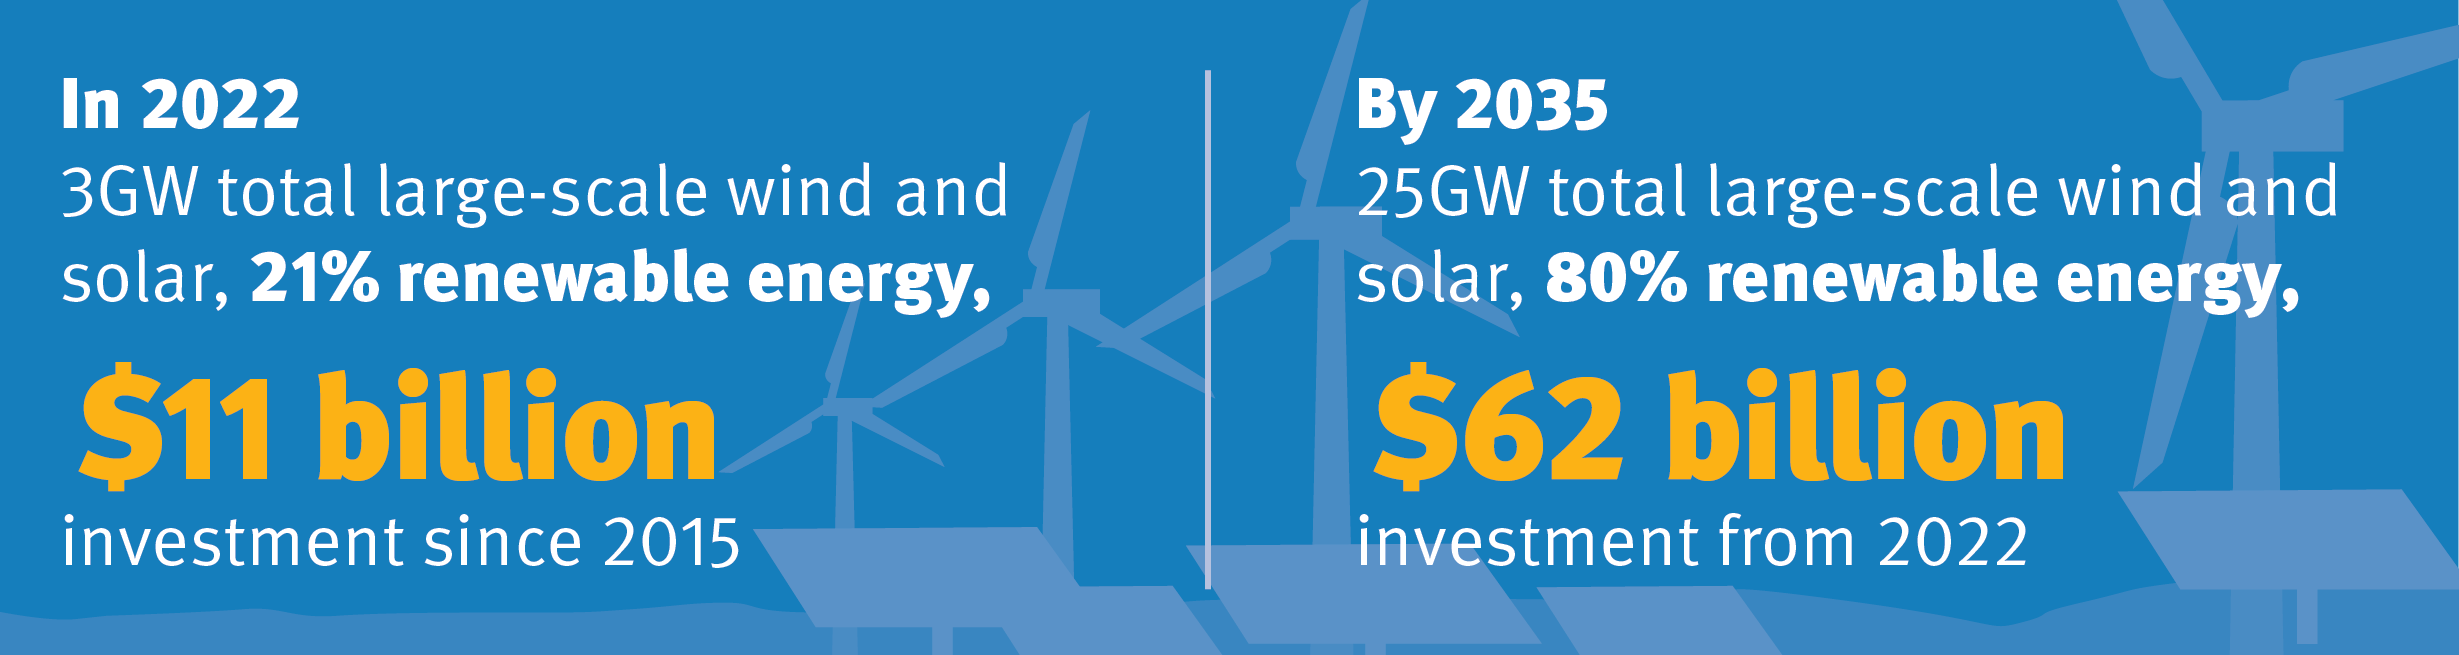 In 2022, Queensland had 21% renewable energy and had invested $11b since 2015. By 2035, Queensland plans to have 80% renewable energy and to invest $62b.